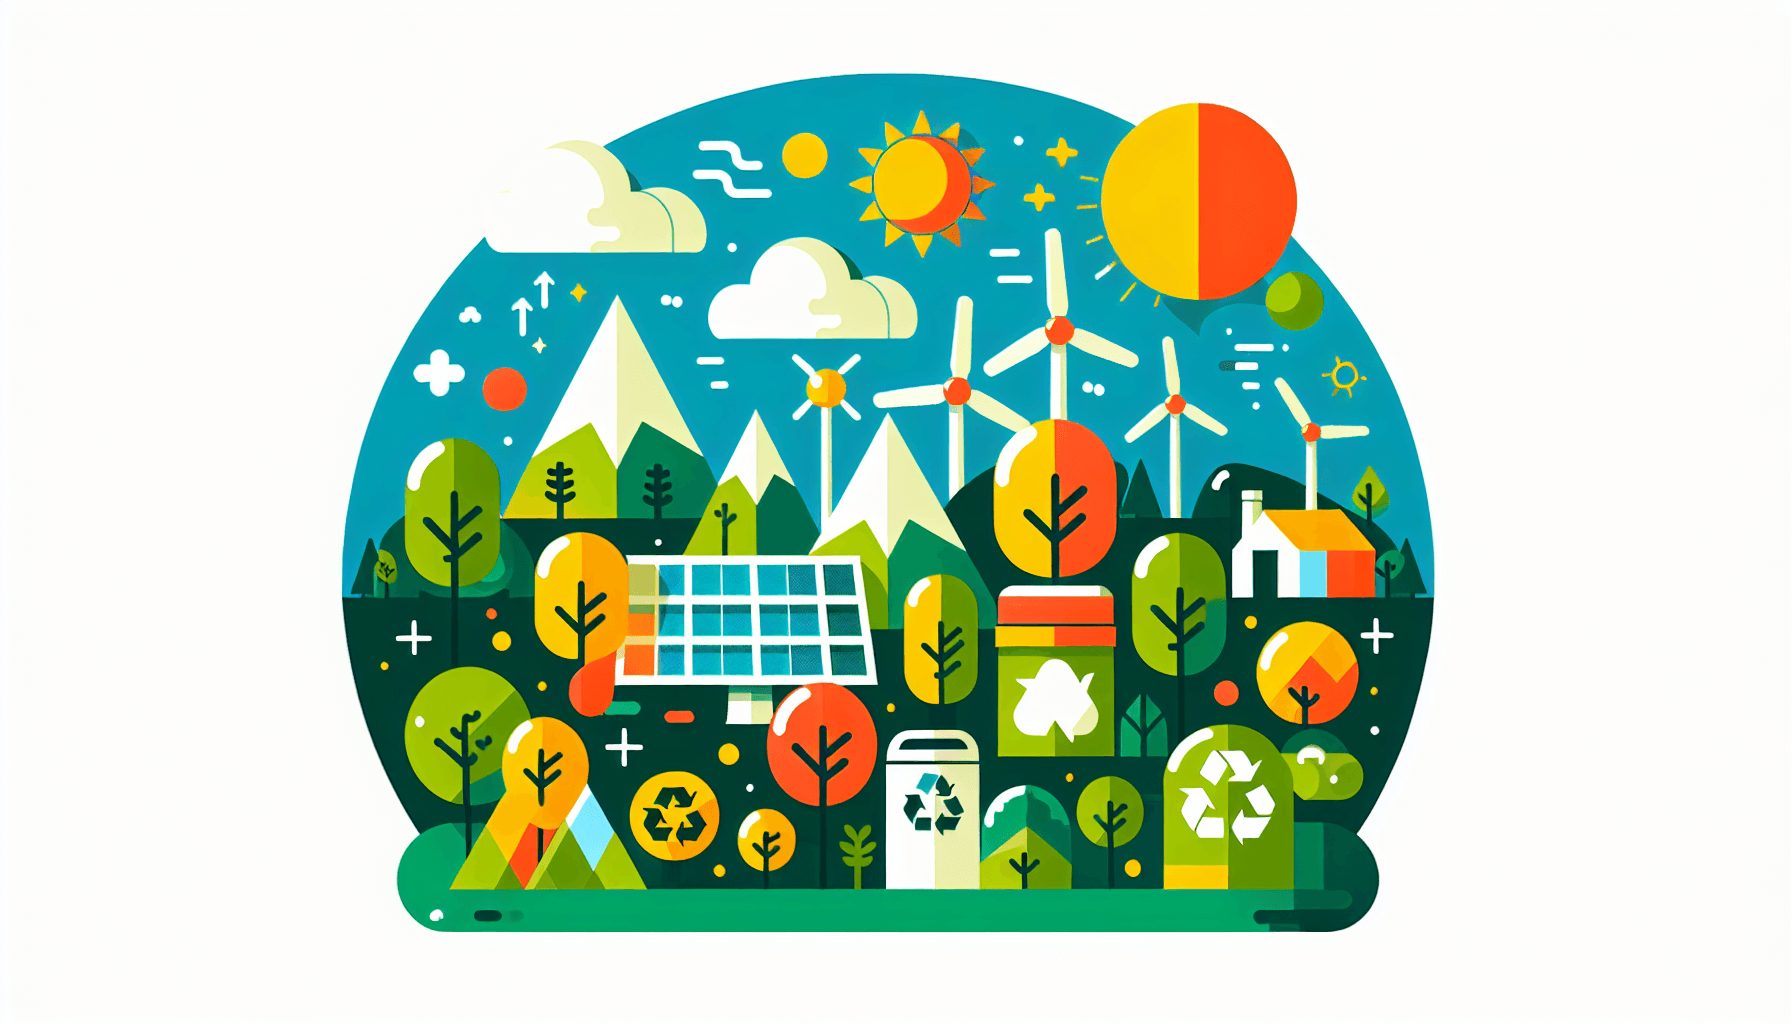 Sustainability in flat illustration style and white background, red #f47574, green #88c7a8, yellow #fcc44b, and blue #645bc8 colors.